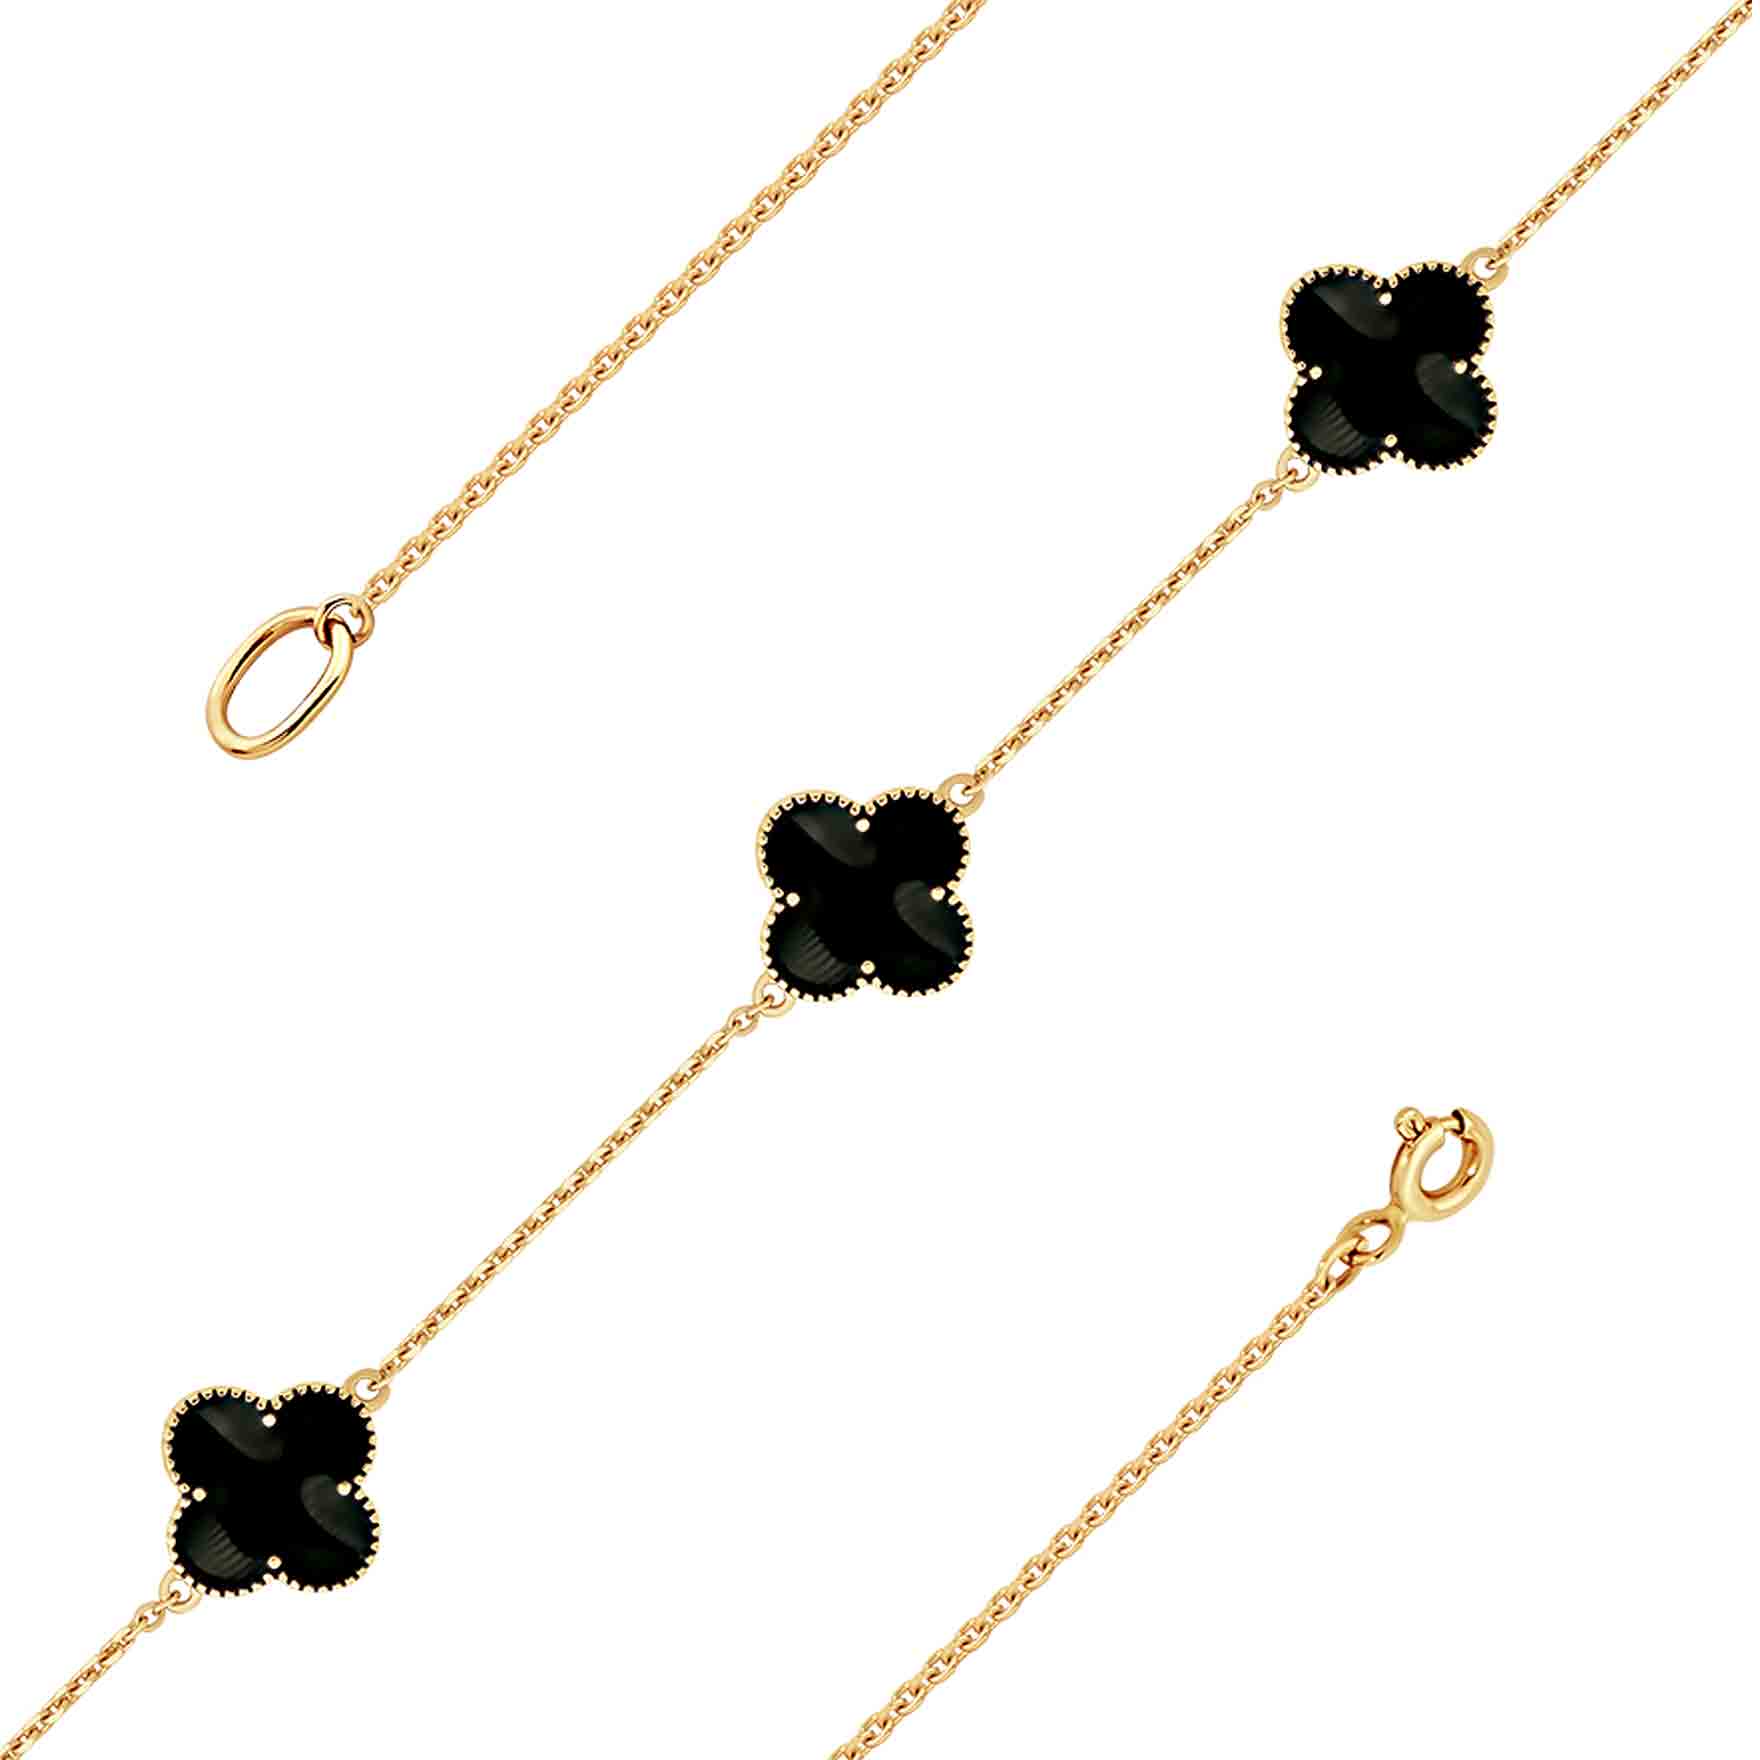 Gold Black Clover Cable Bangle